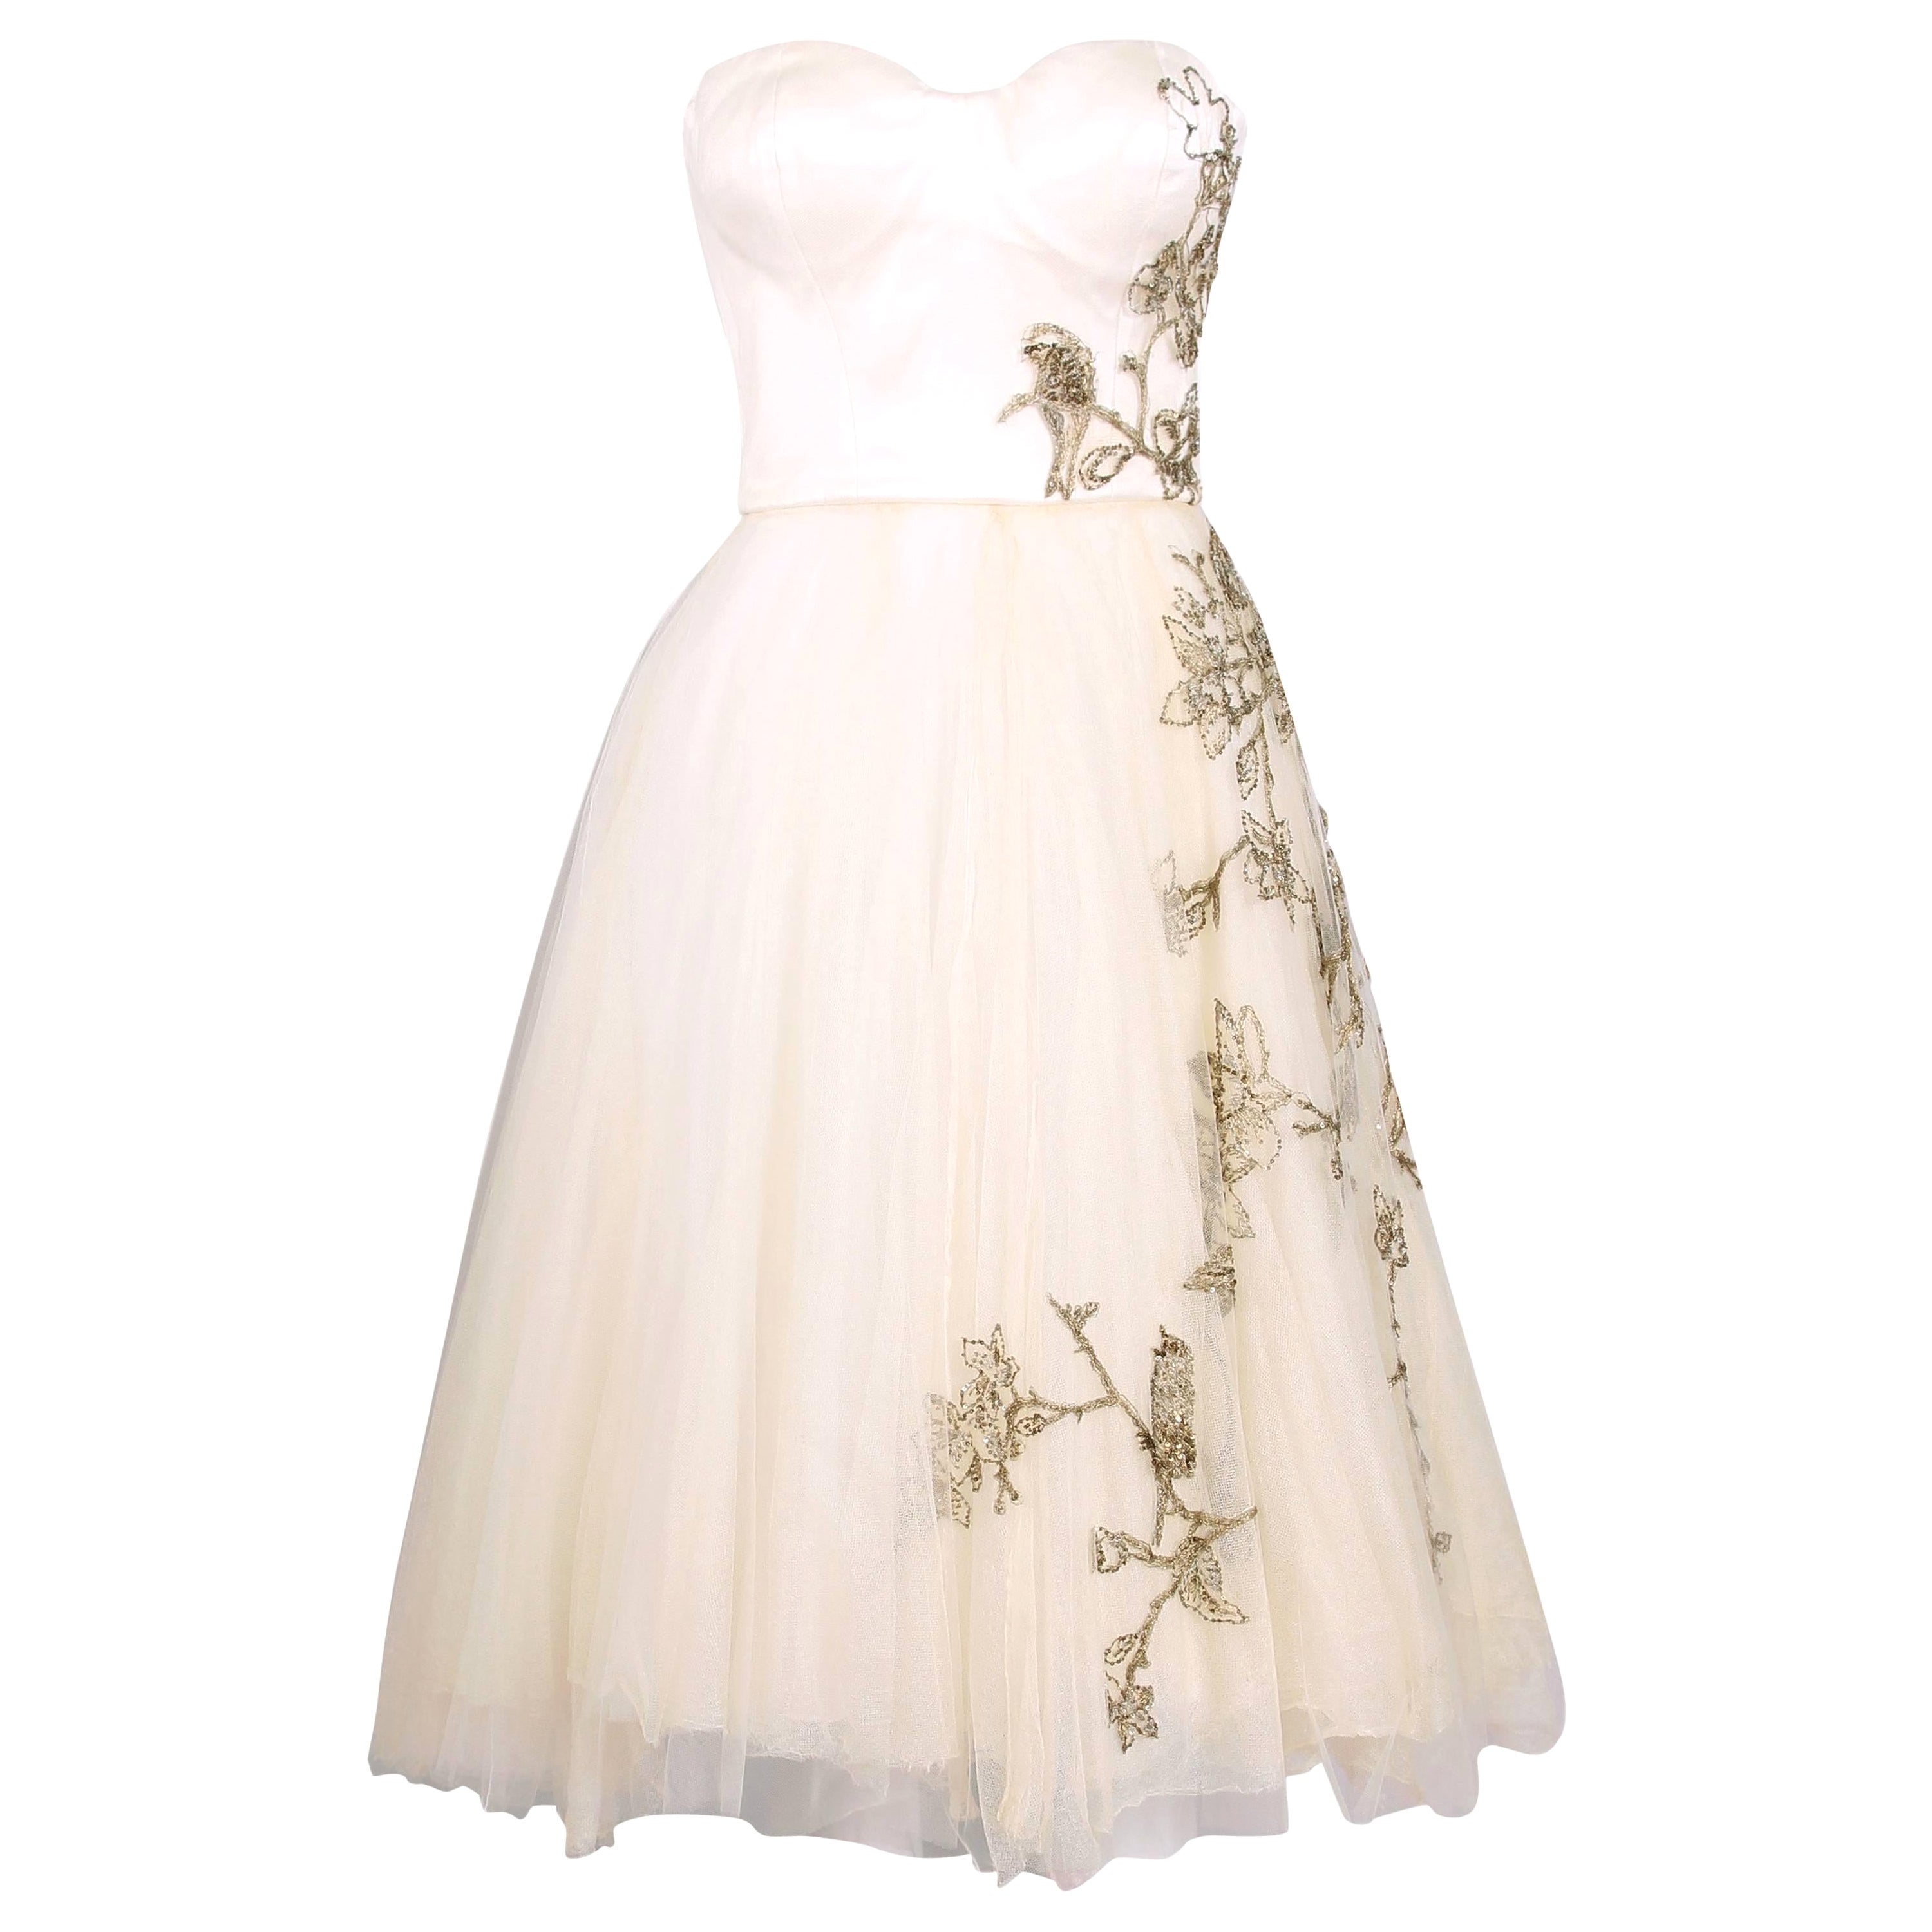 2008 F/W Alexander McQueen Gold Embroidered Strapless Tulle & Satin Dress For Sale